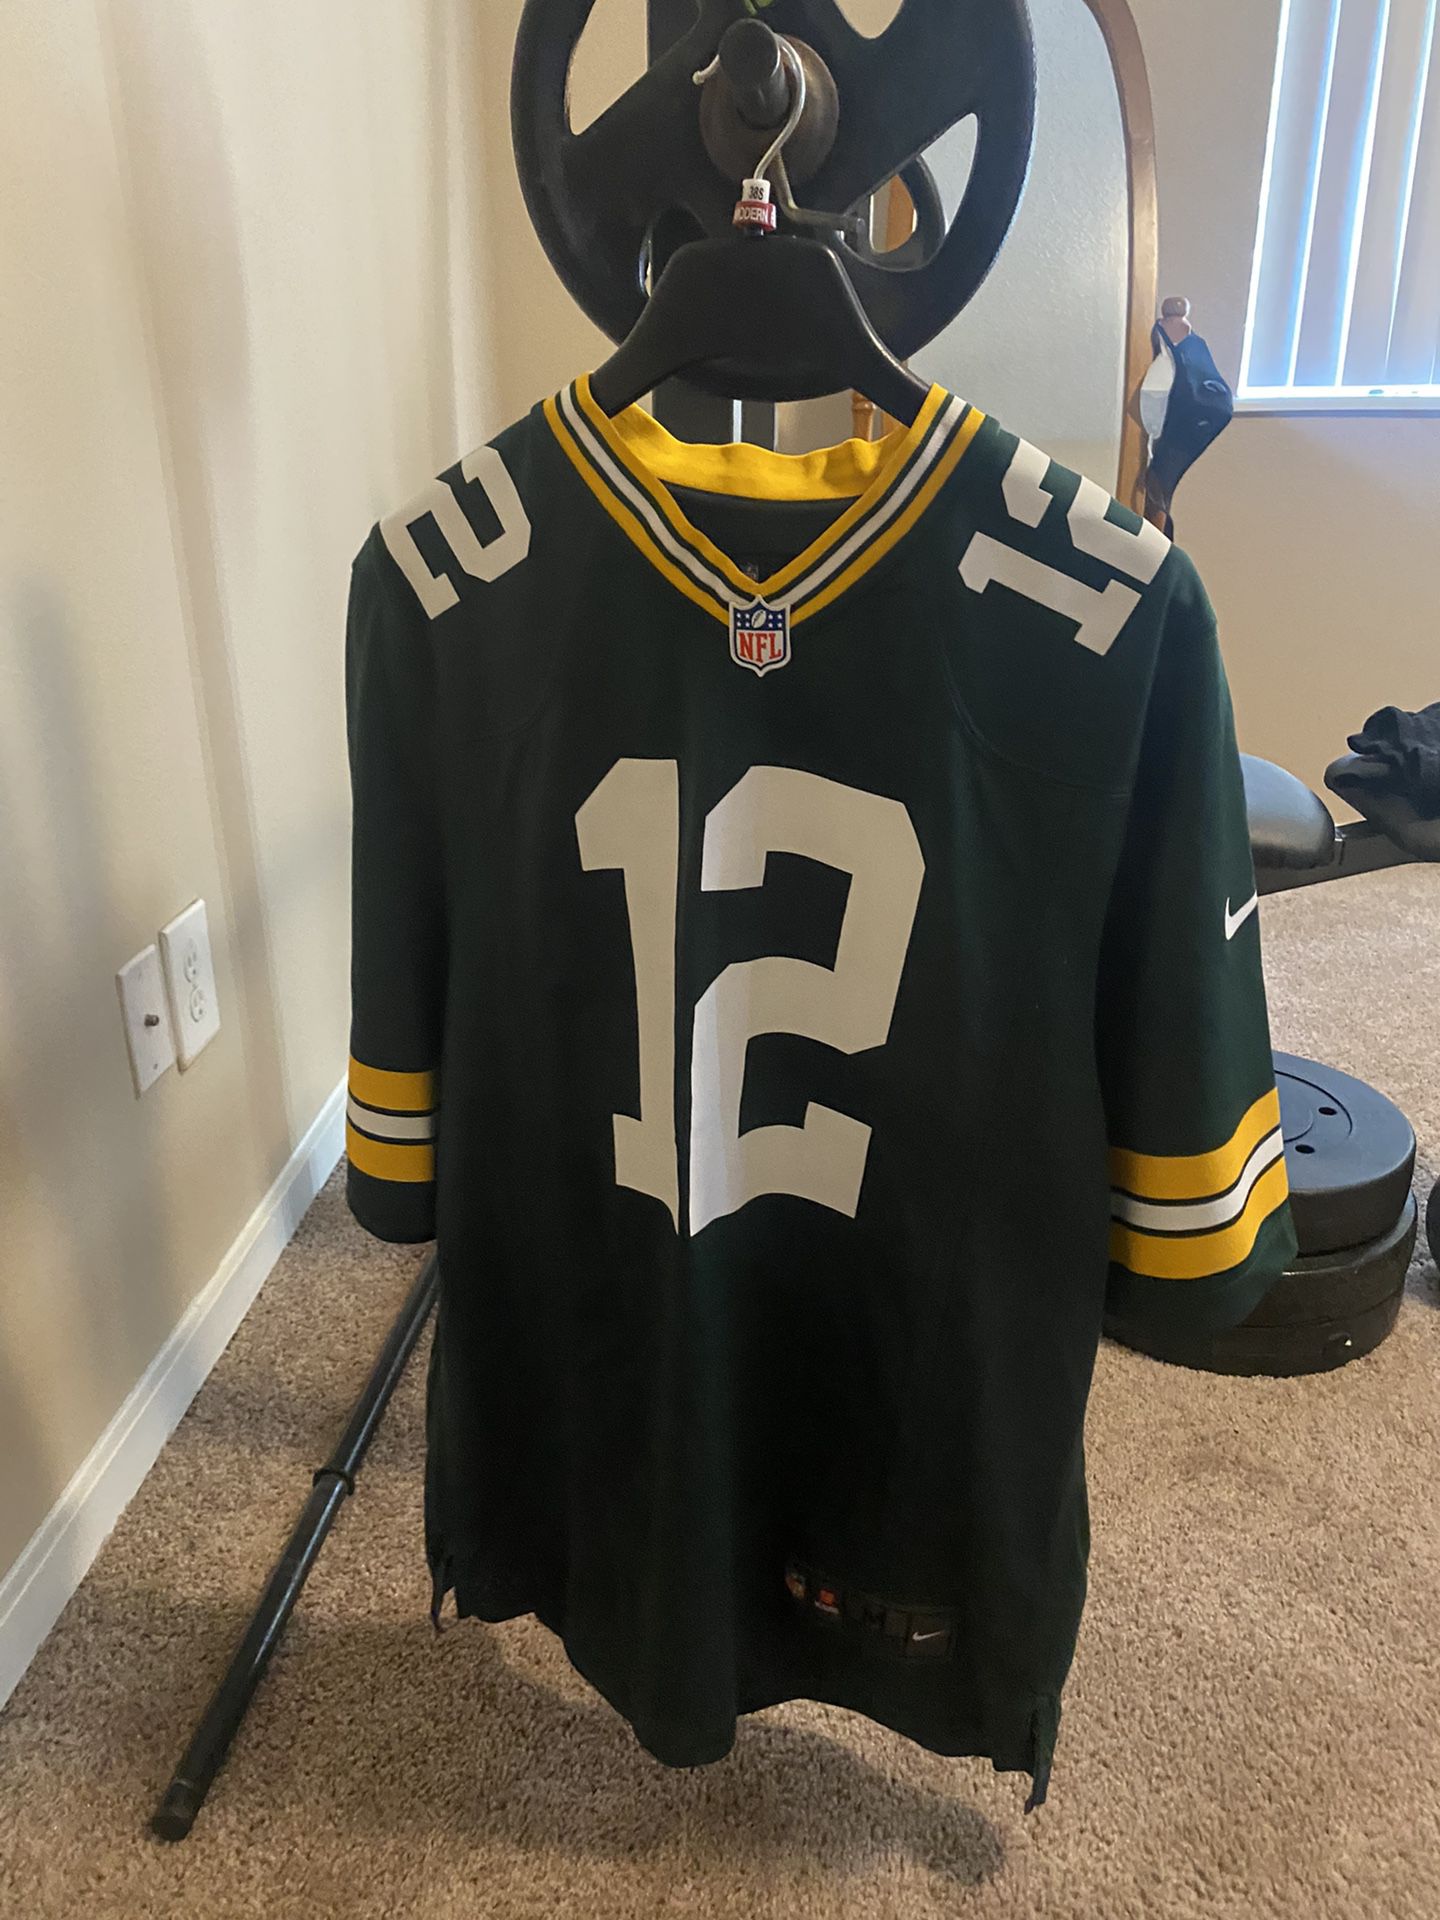 Authentic Medium Green Bay Packers #12 Jersey! 